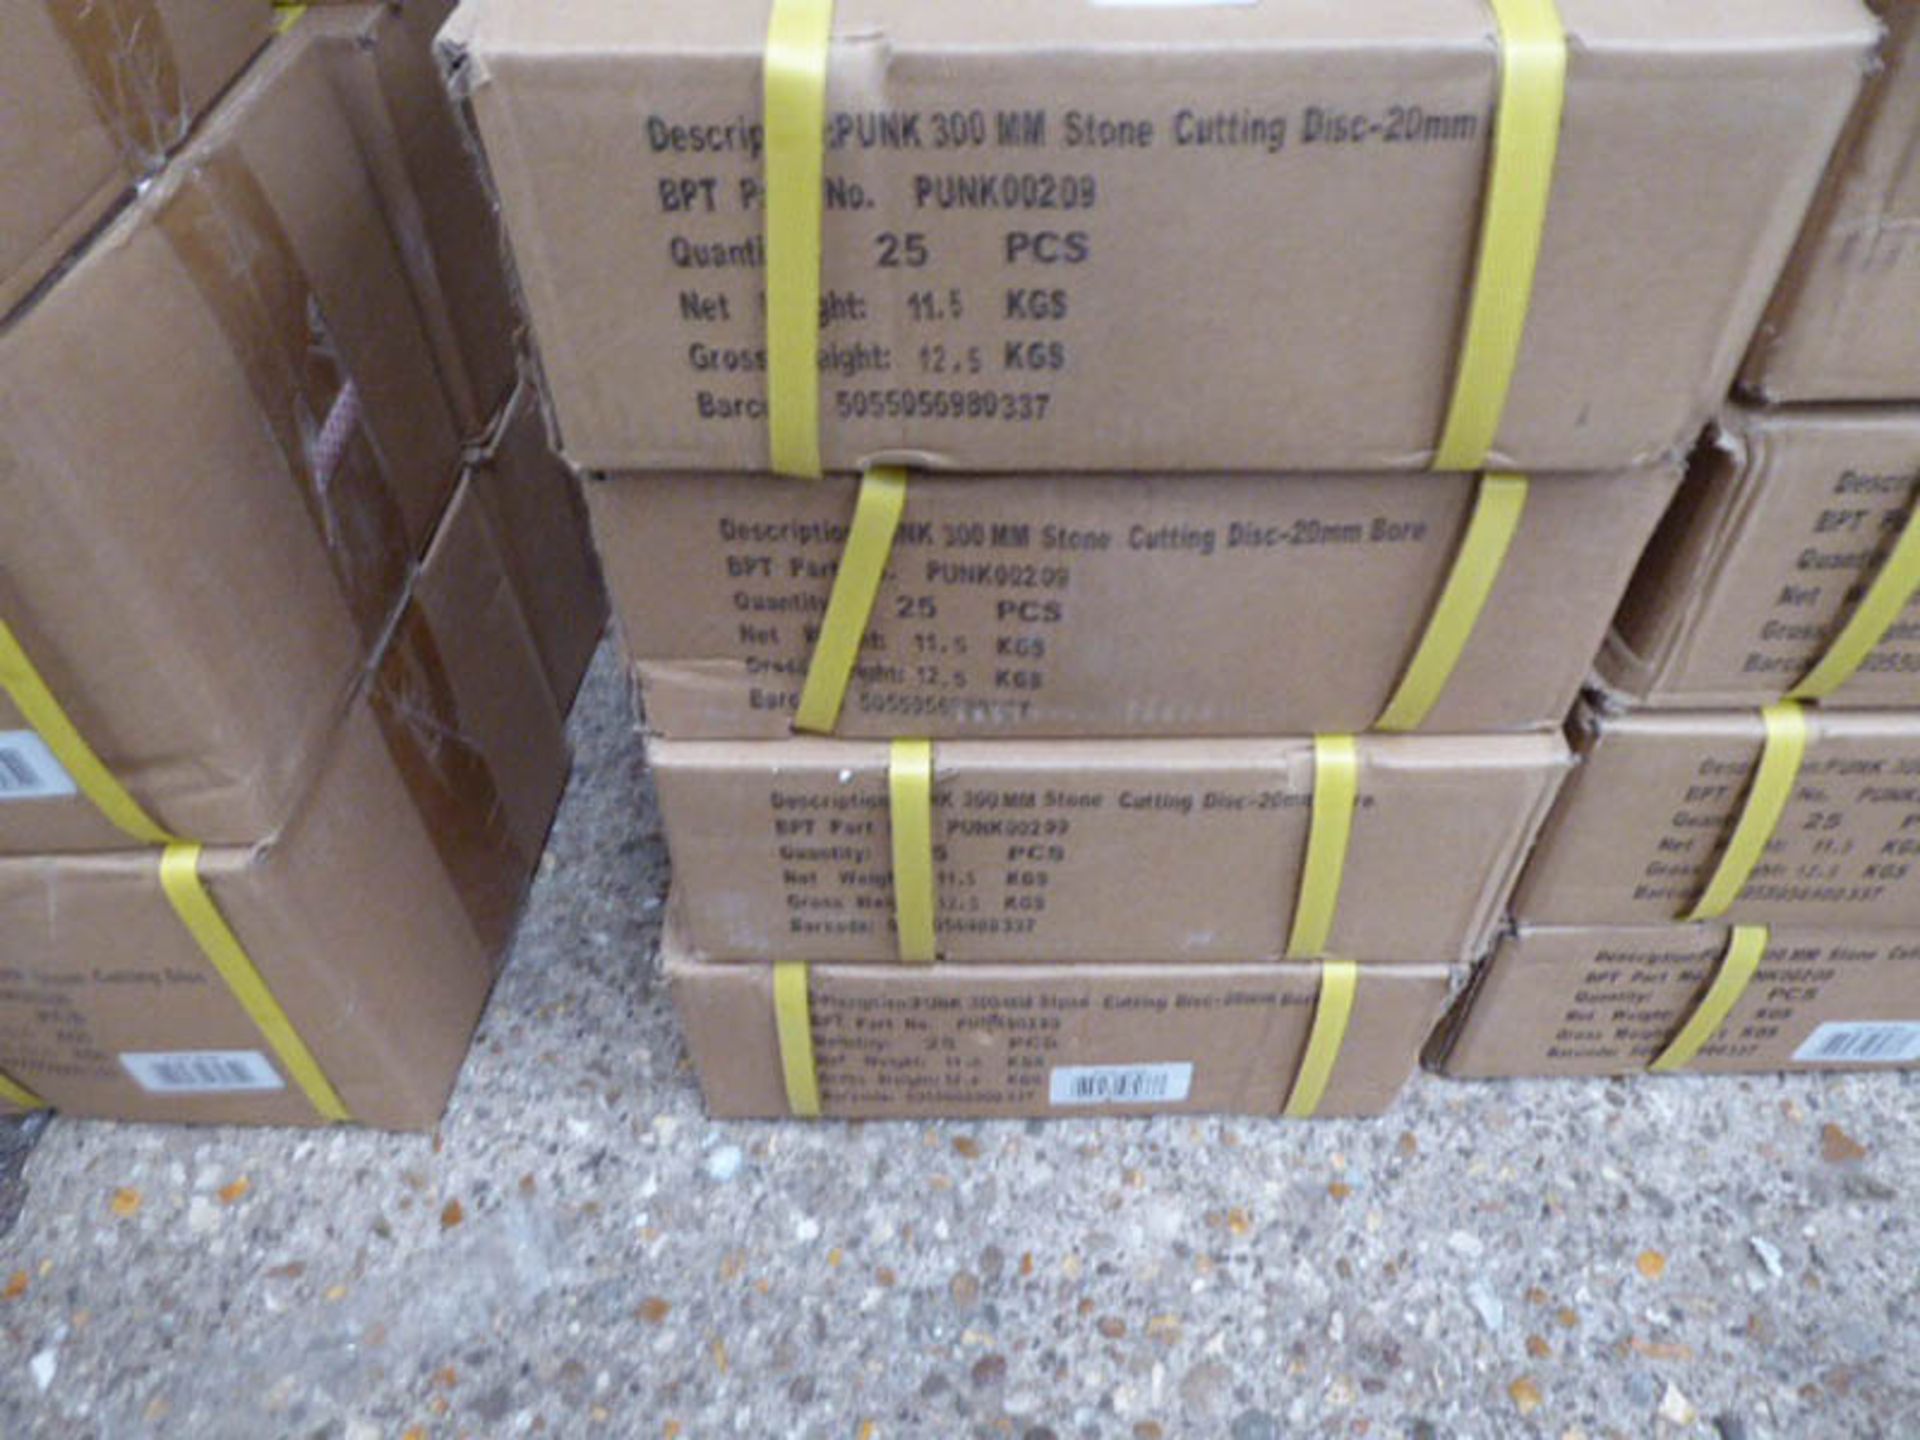 4 boxes containing approx. 25 PUNK 00209 300mm stone cutting disks